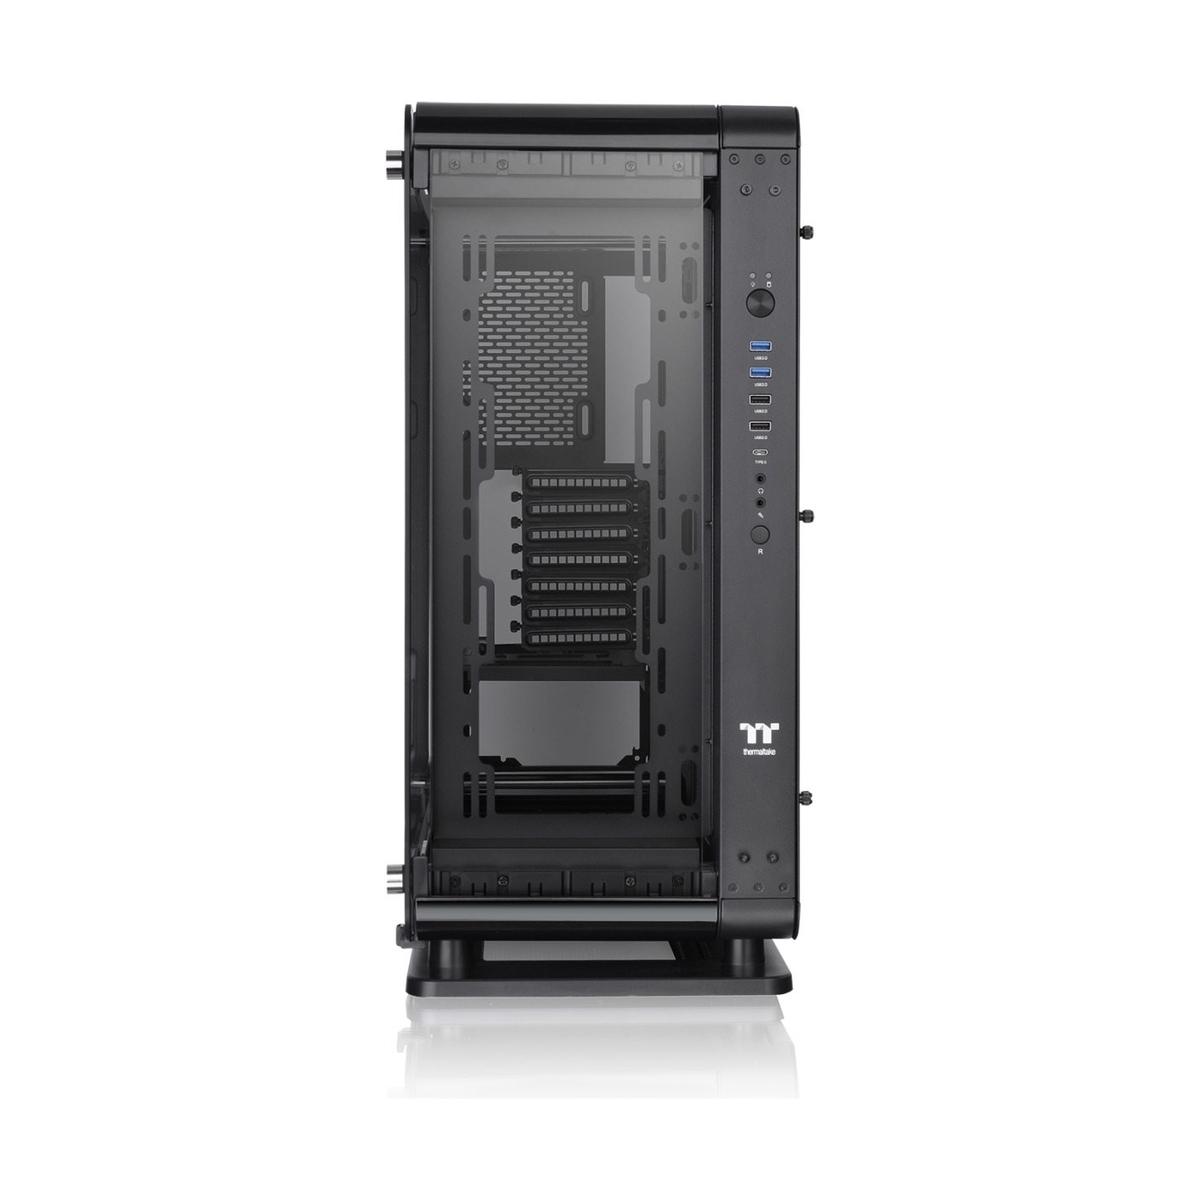 One Gaming PC powered by WD_BLACK Special Edition